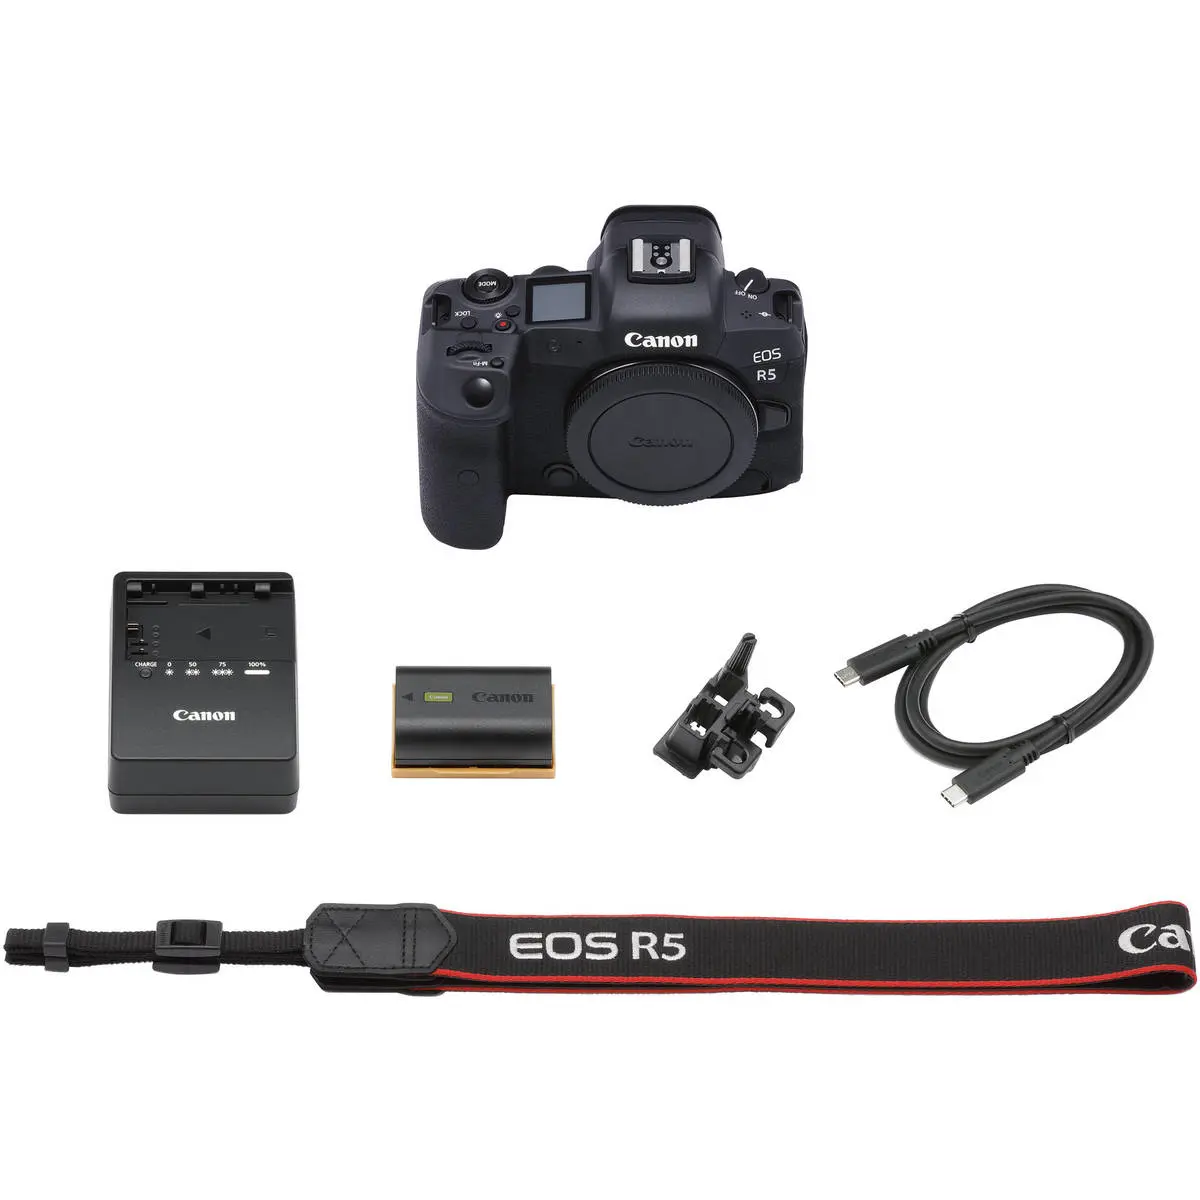 5. Canon EOS R5 Body (with adapter)